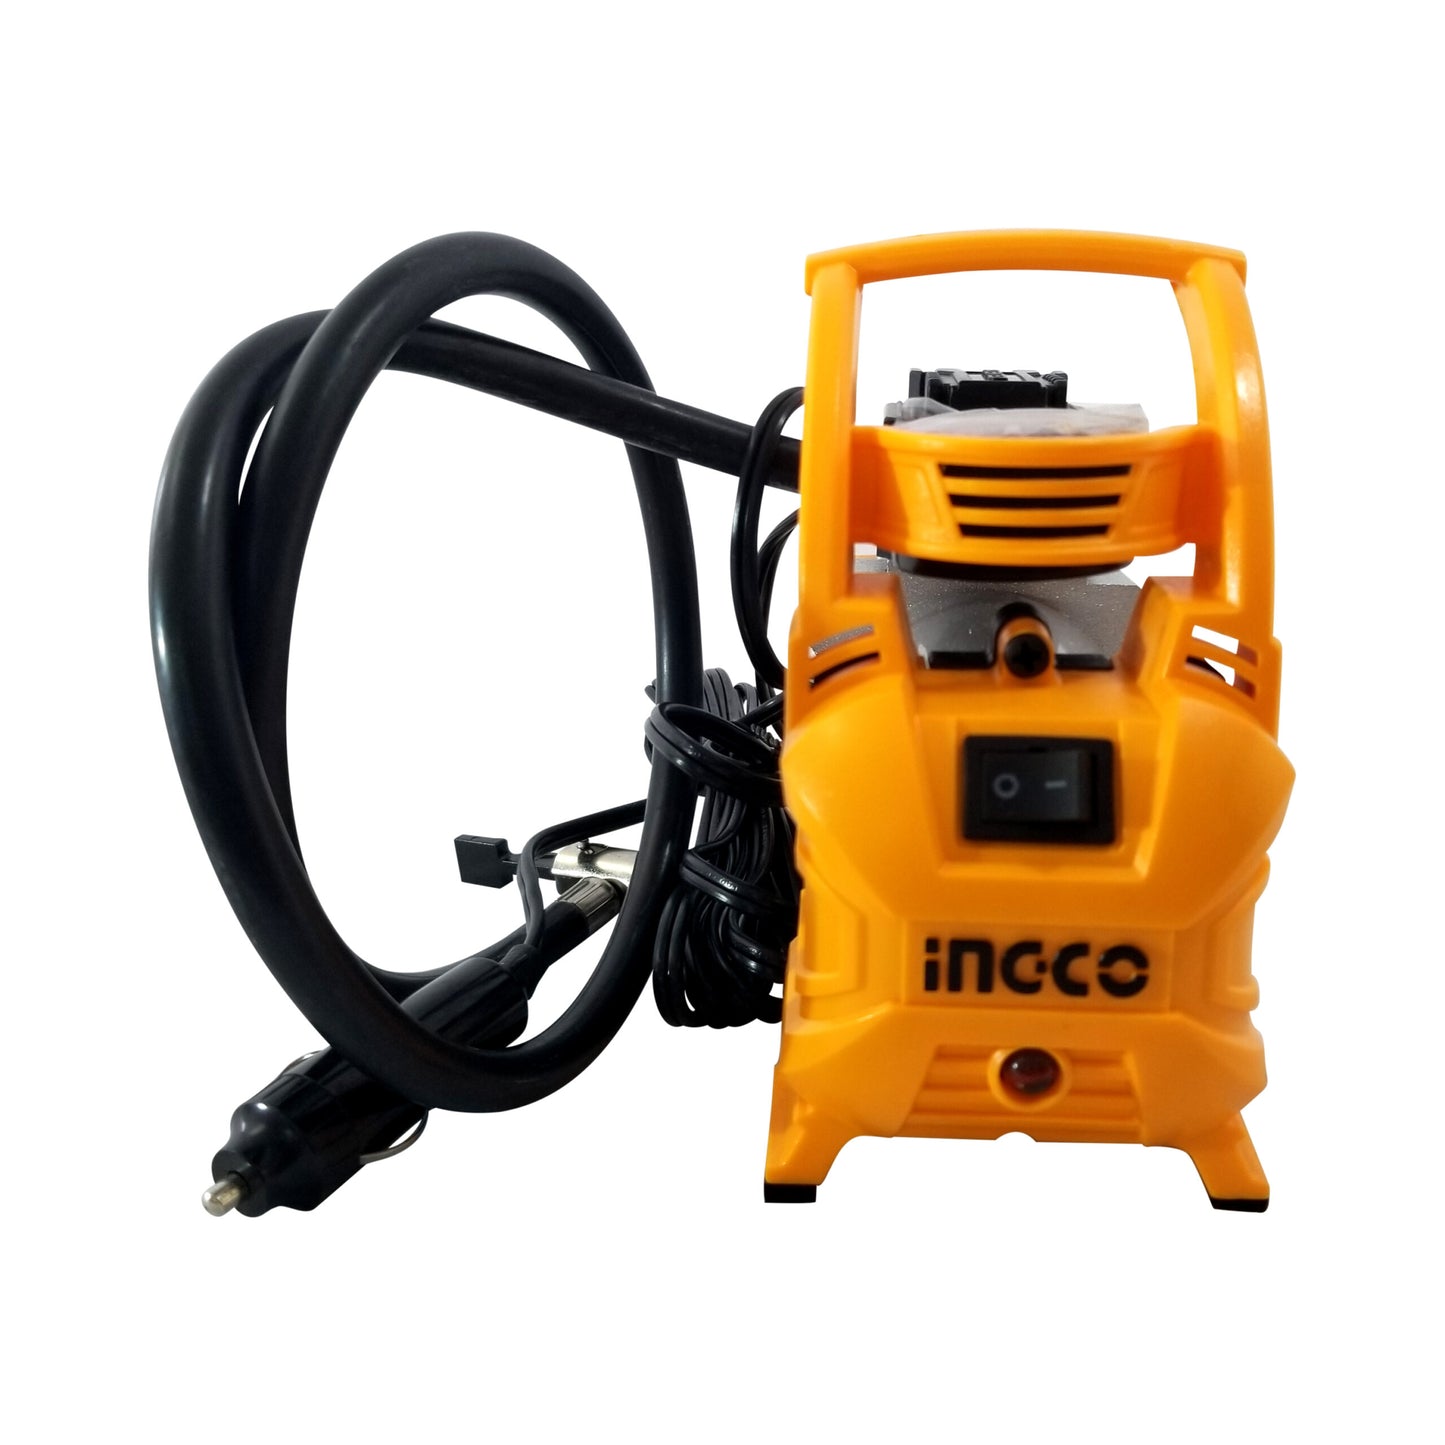 INGCO Auto Air Compressor 10A 12V for Car Tire Inflator with 3meters Cord, 10bar, and Battery Clamp | AAC1408